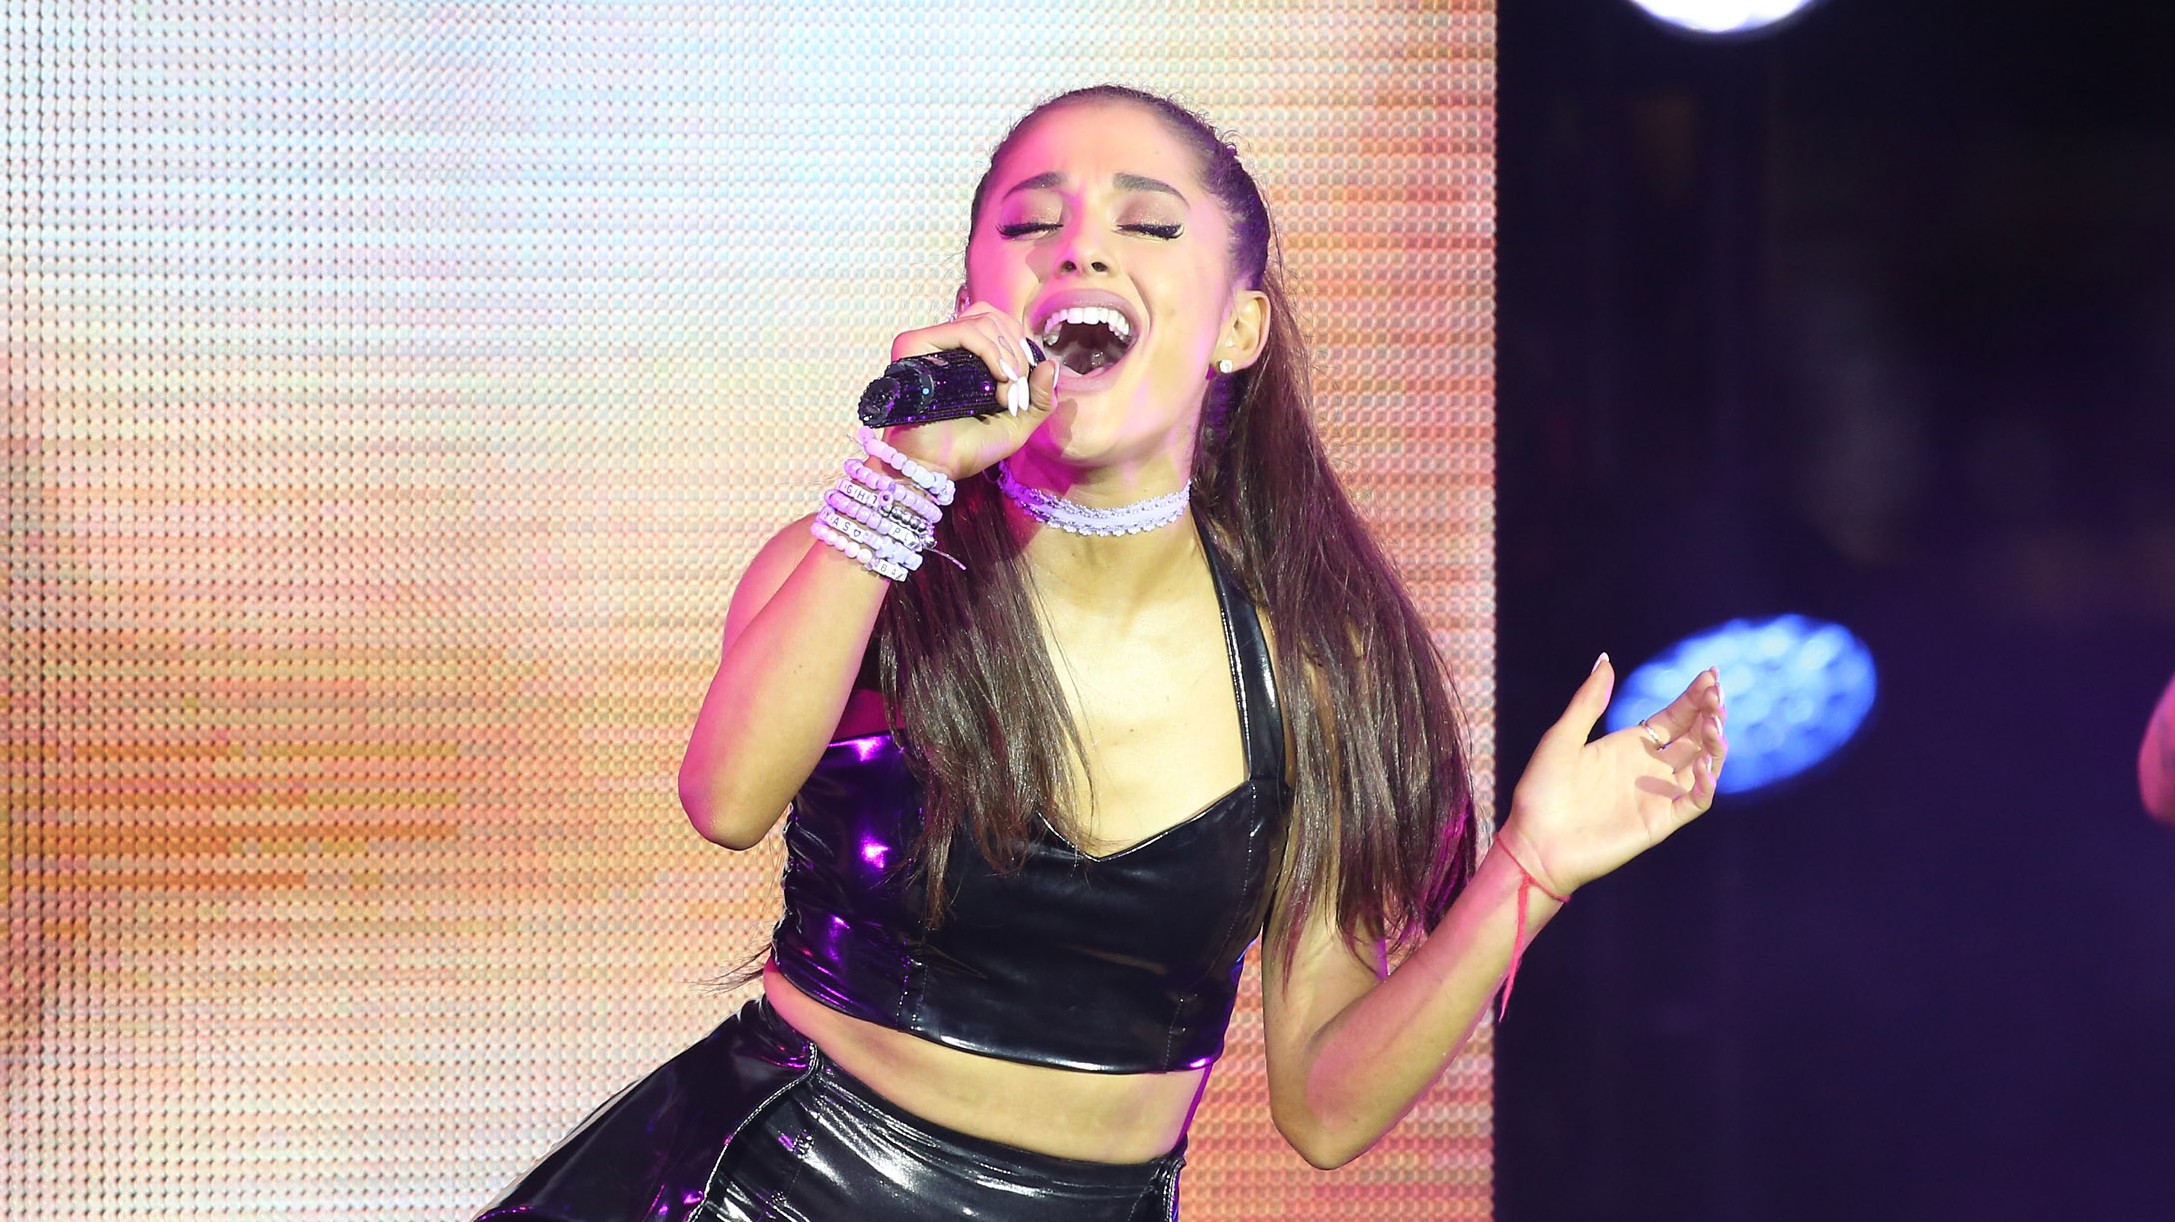 Ariana Grande performs on stage during the 29th annual NYC Pride: Dance On The Pier on June 28, 2015 in New York City.  (Photo by Neilson Barnard/Getty Images)